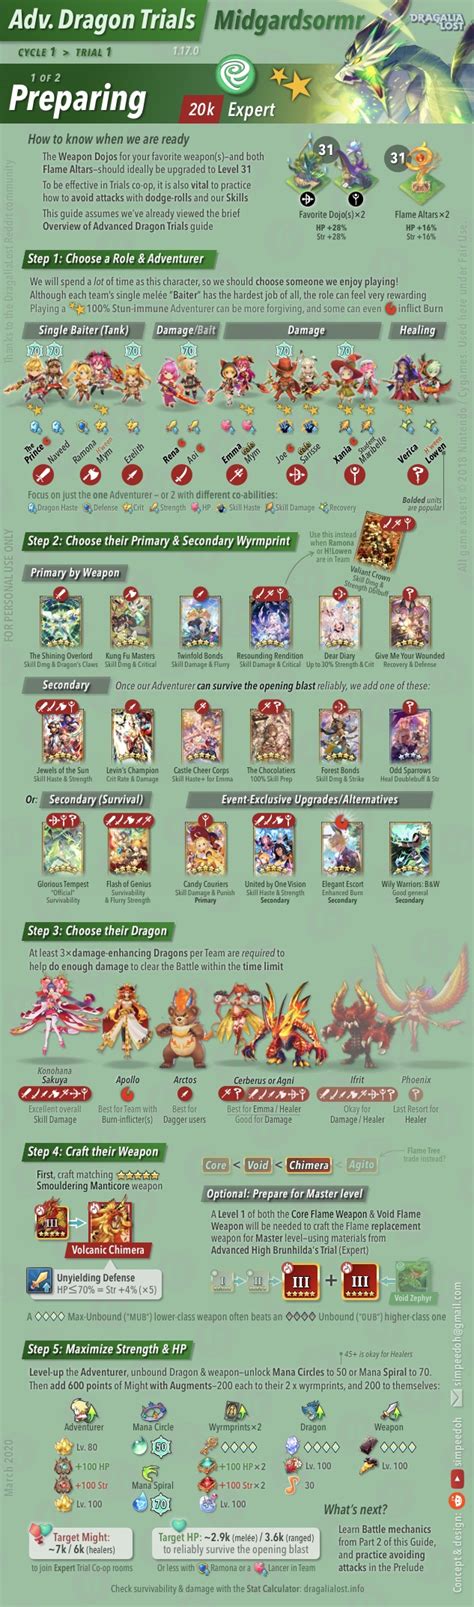 The ultimate high midgardsormr guide! Expert Adv. High Dragon Trial Guides (OC) : DragaliaLost